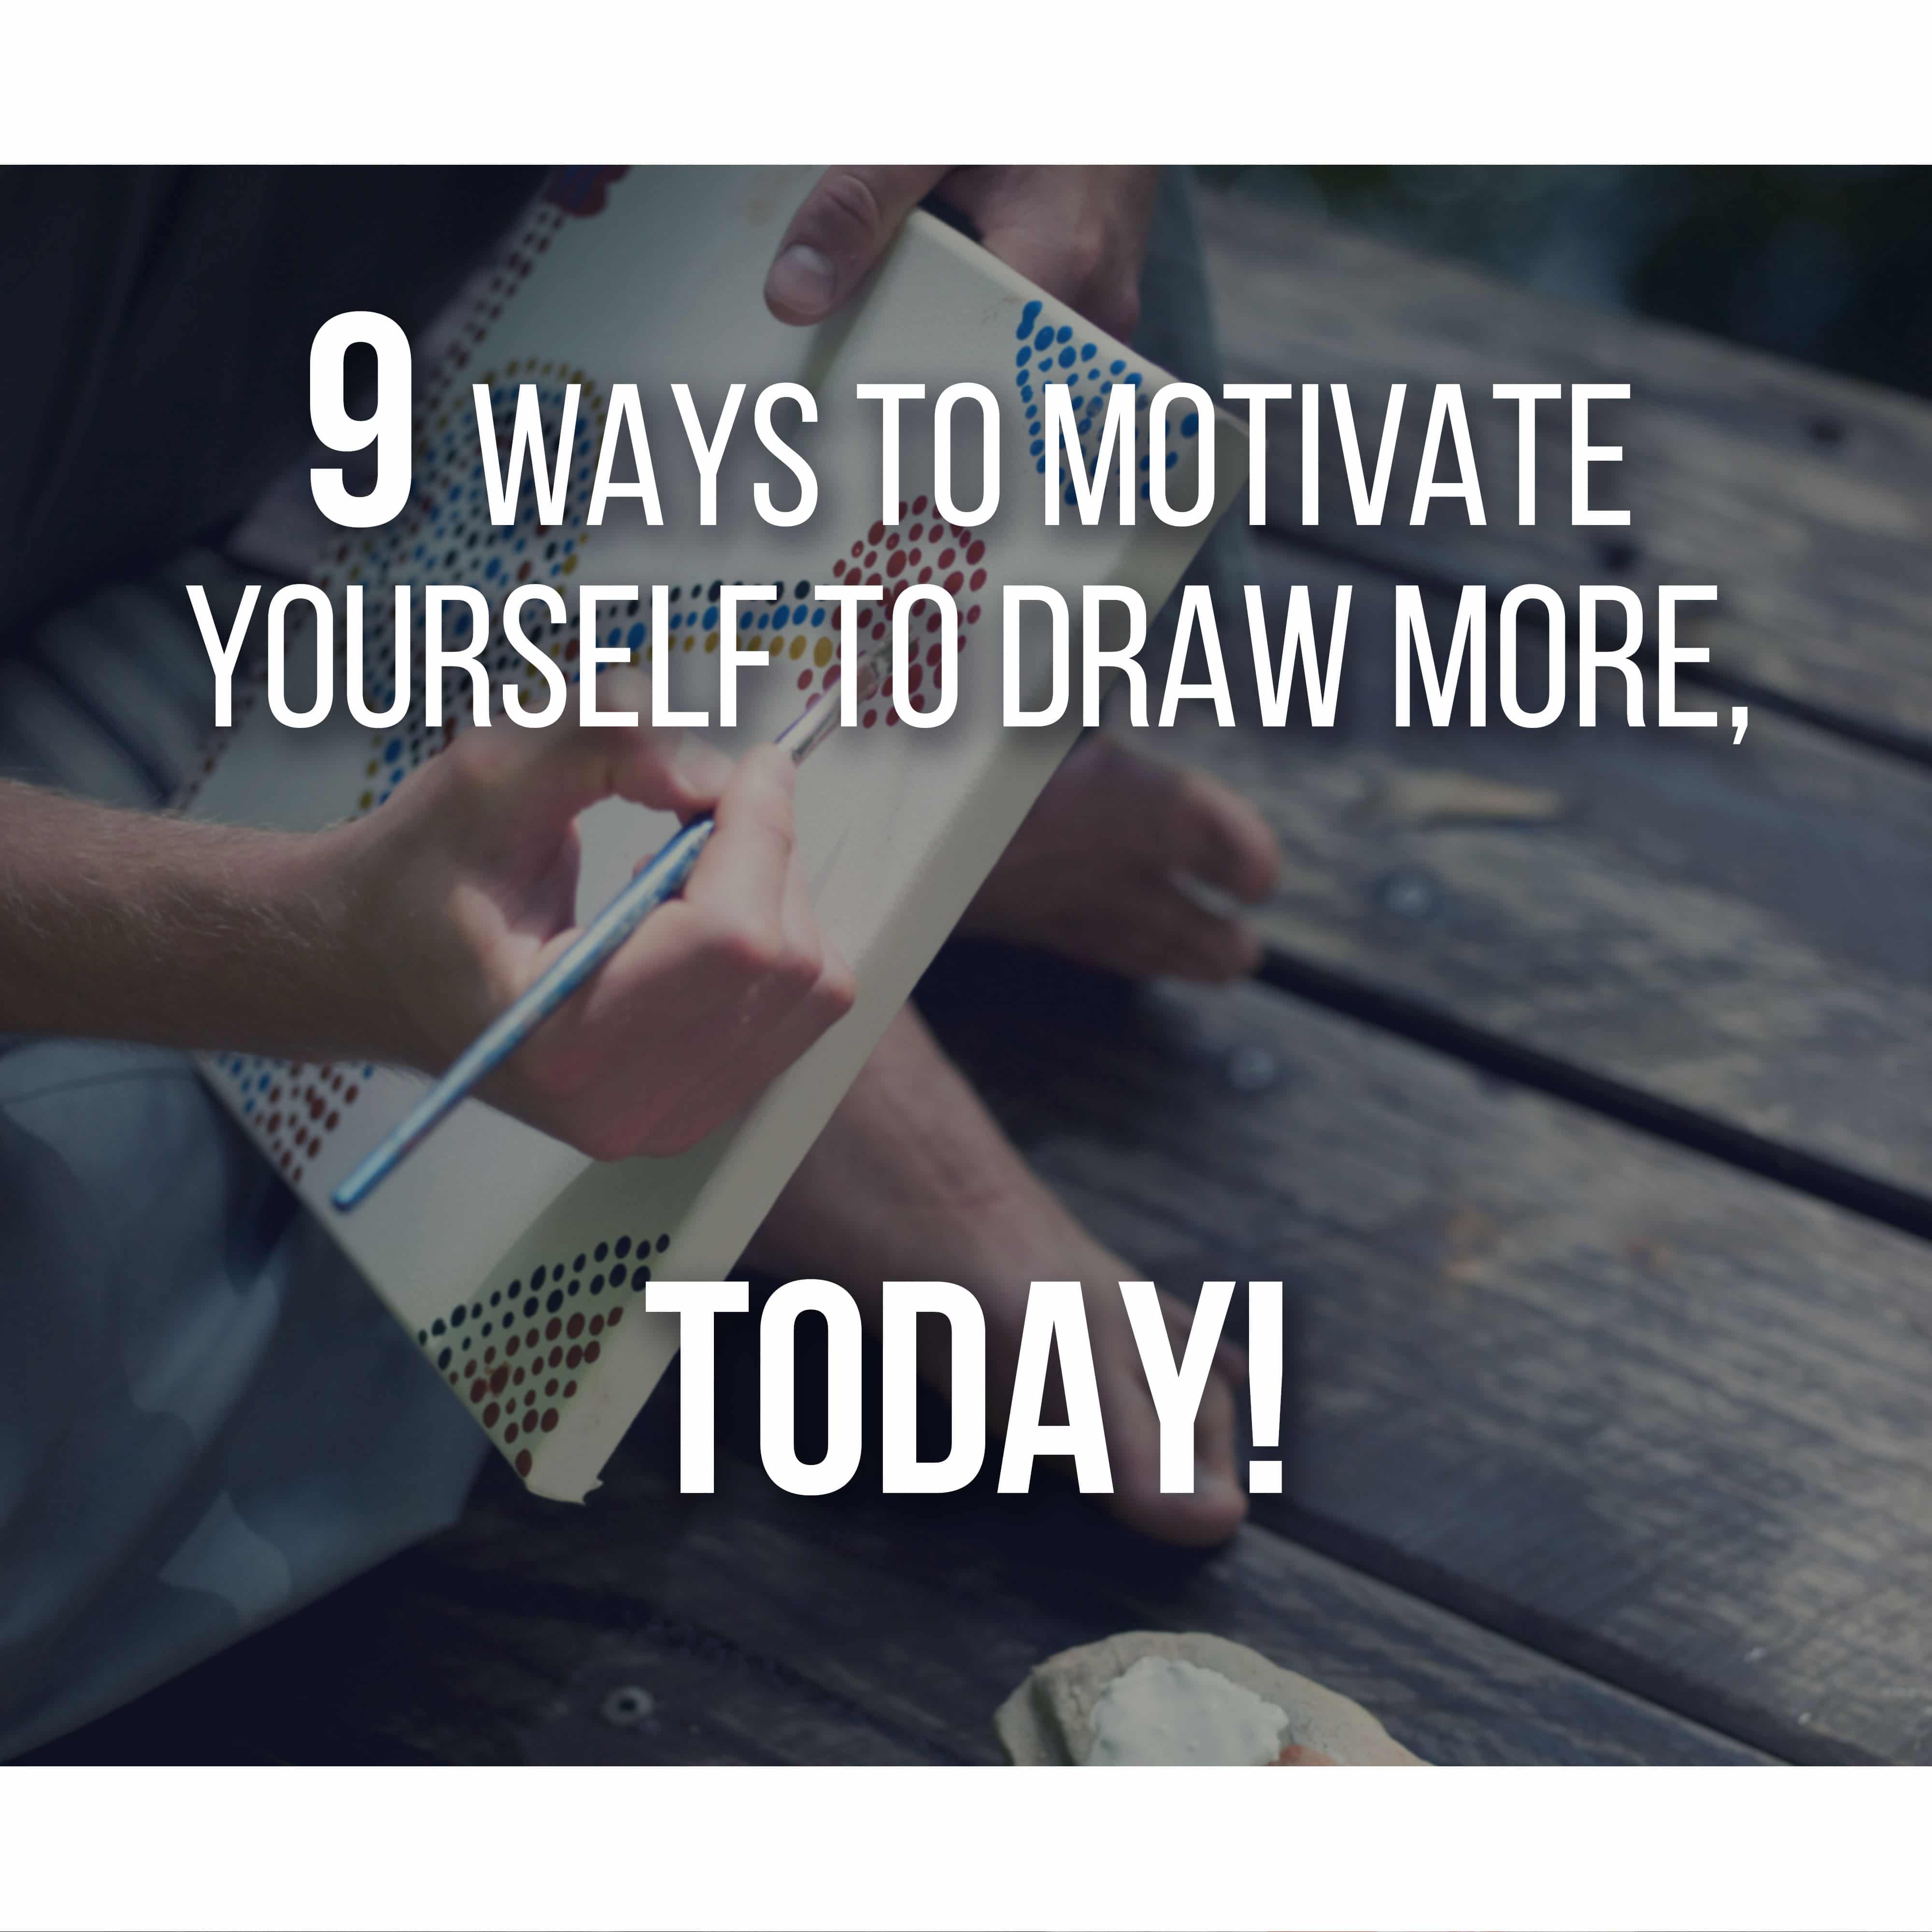 9 Quick And Easy Ways to Motivate Yourself to Draw Right Now!